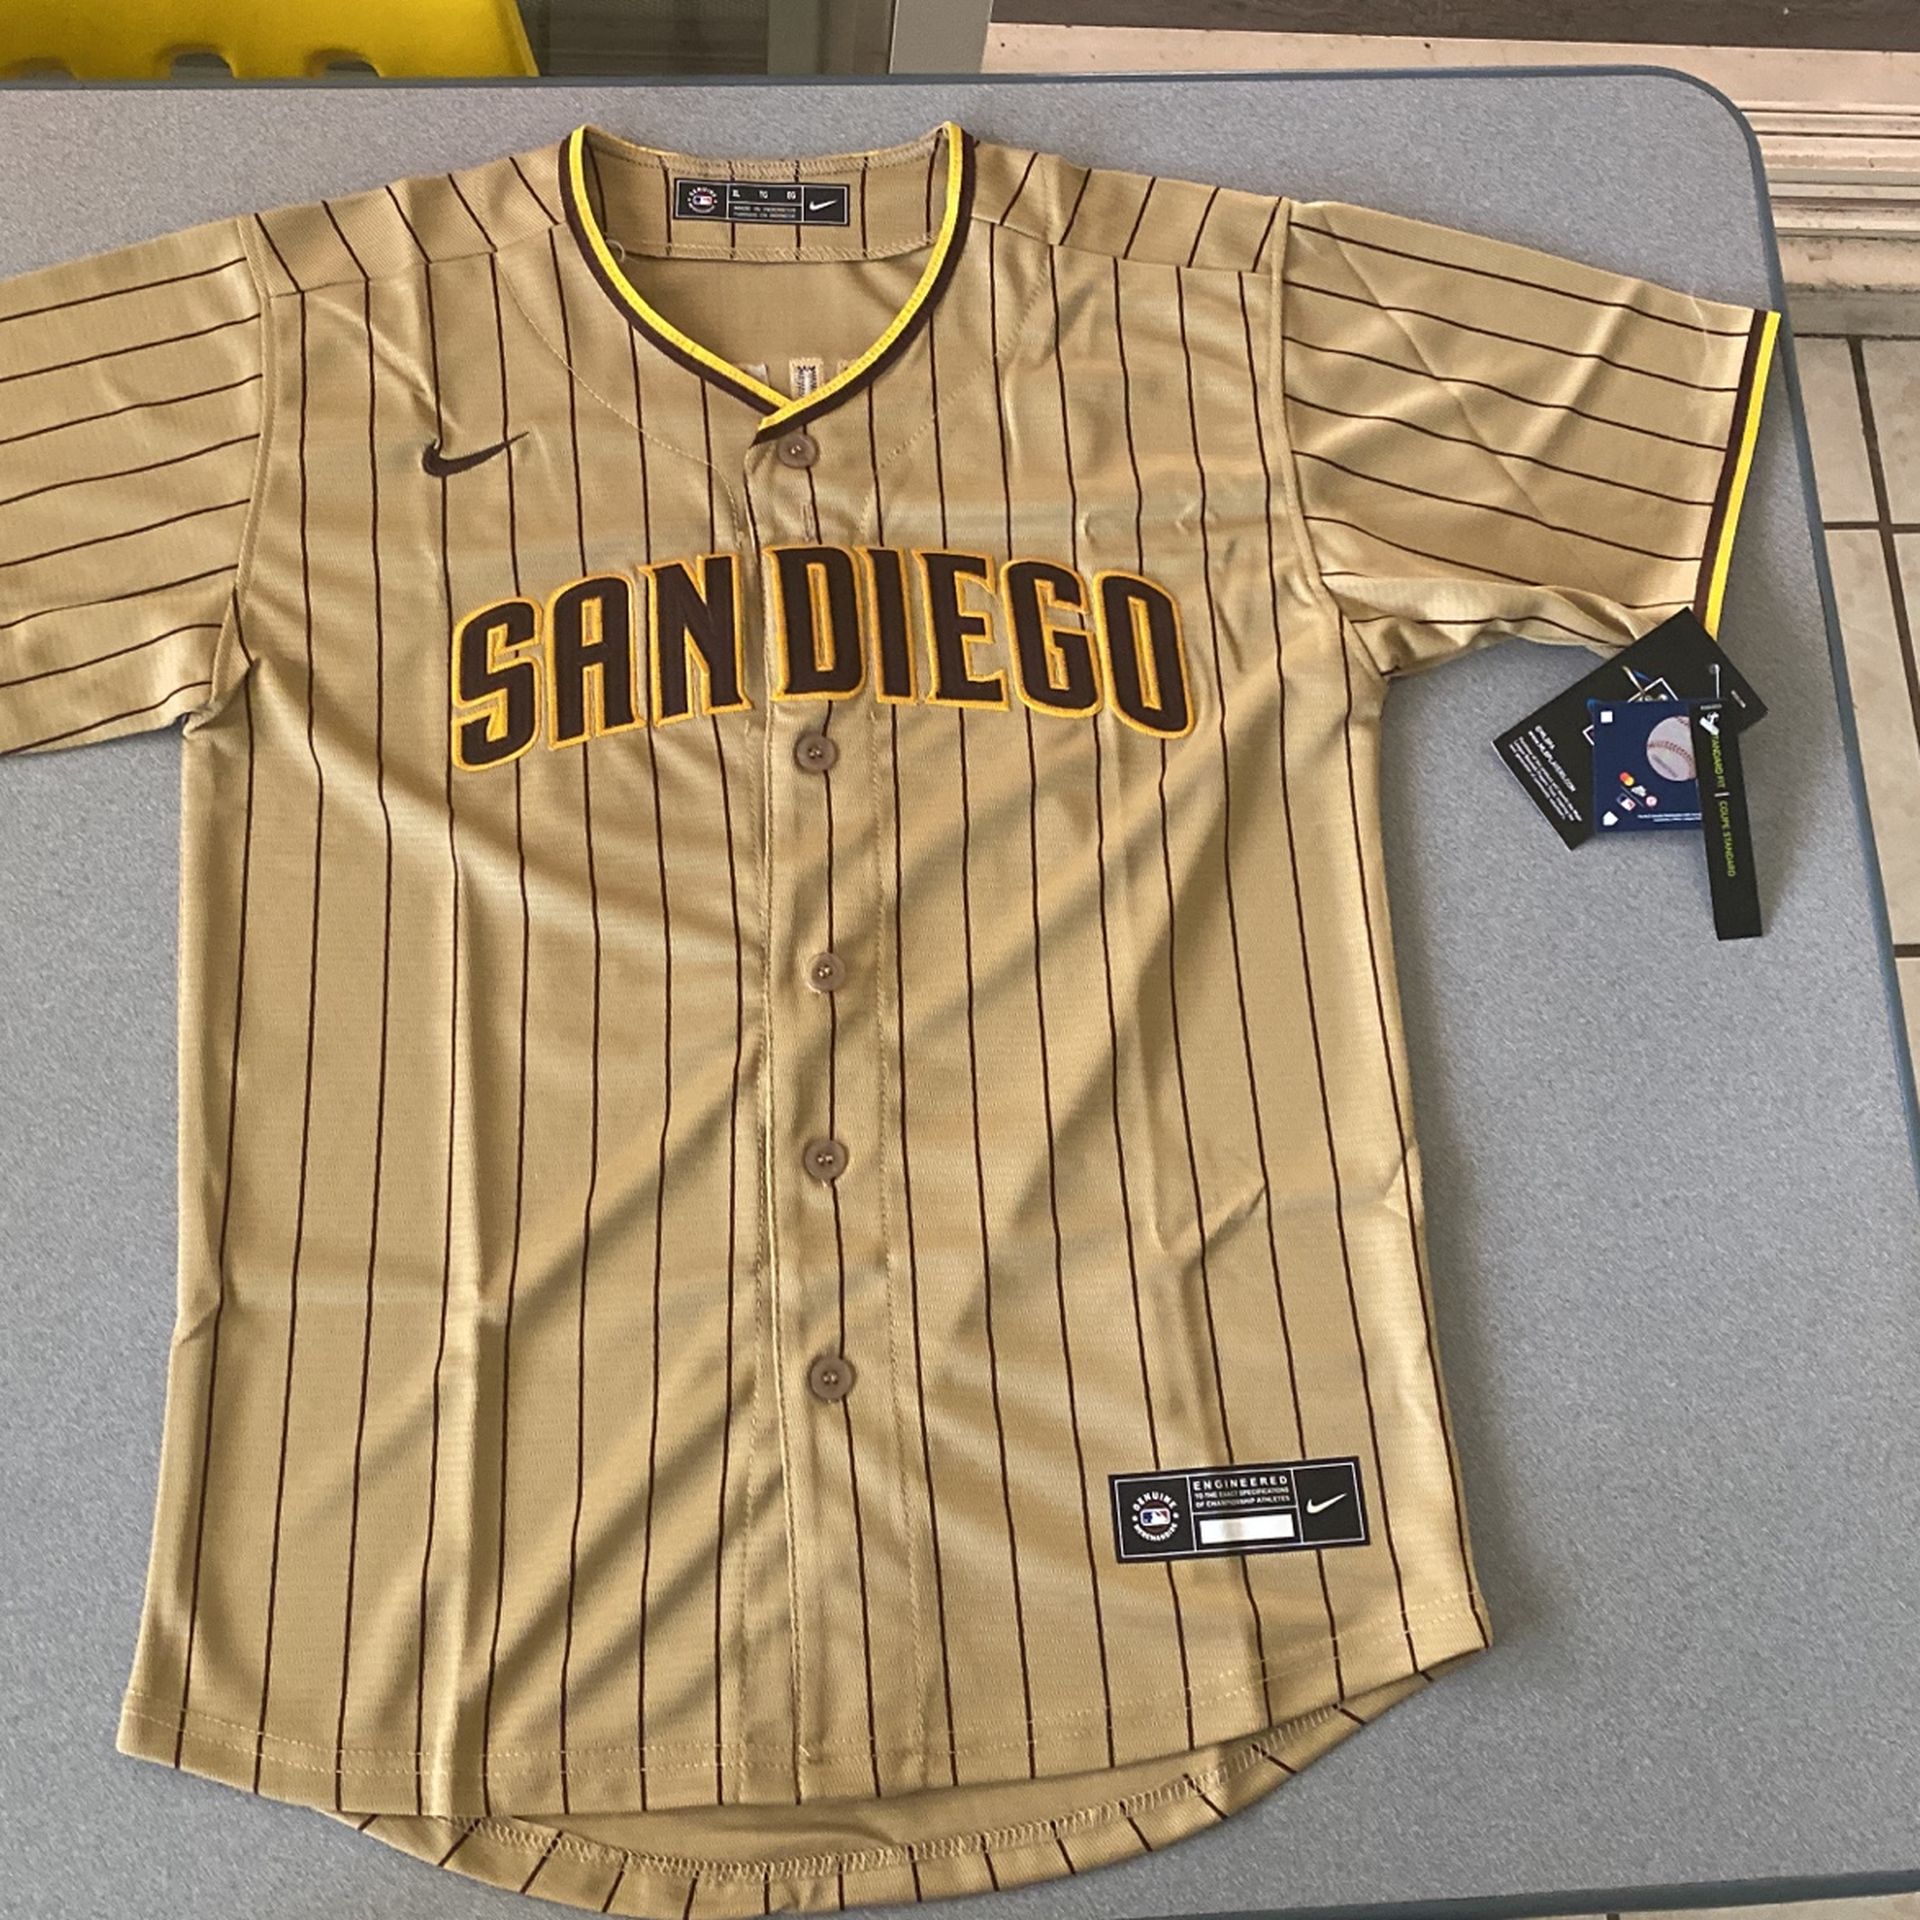 (New) San Diego Padres Youth jersey for Sale in San Diego, CA - OfferUp